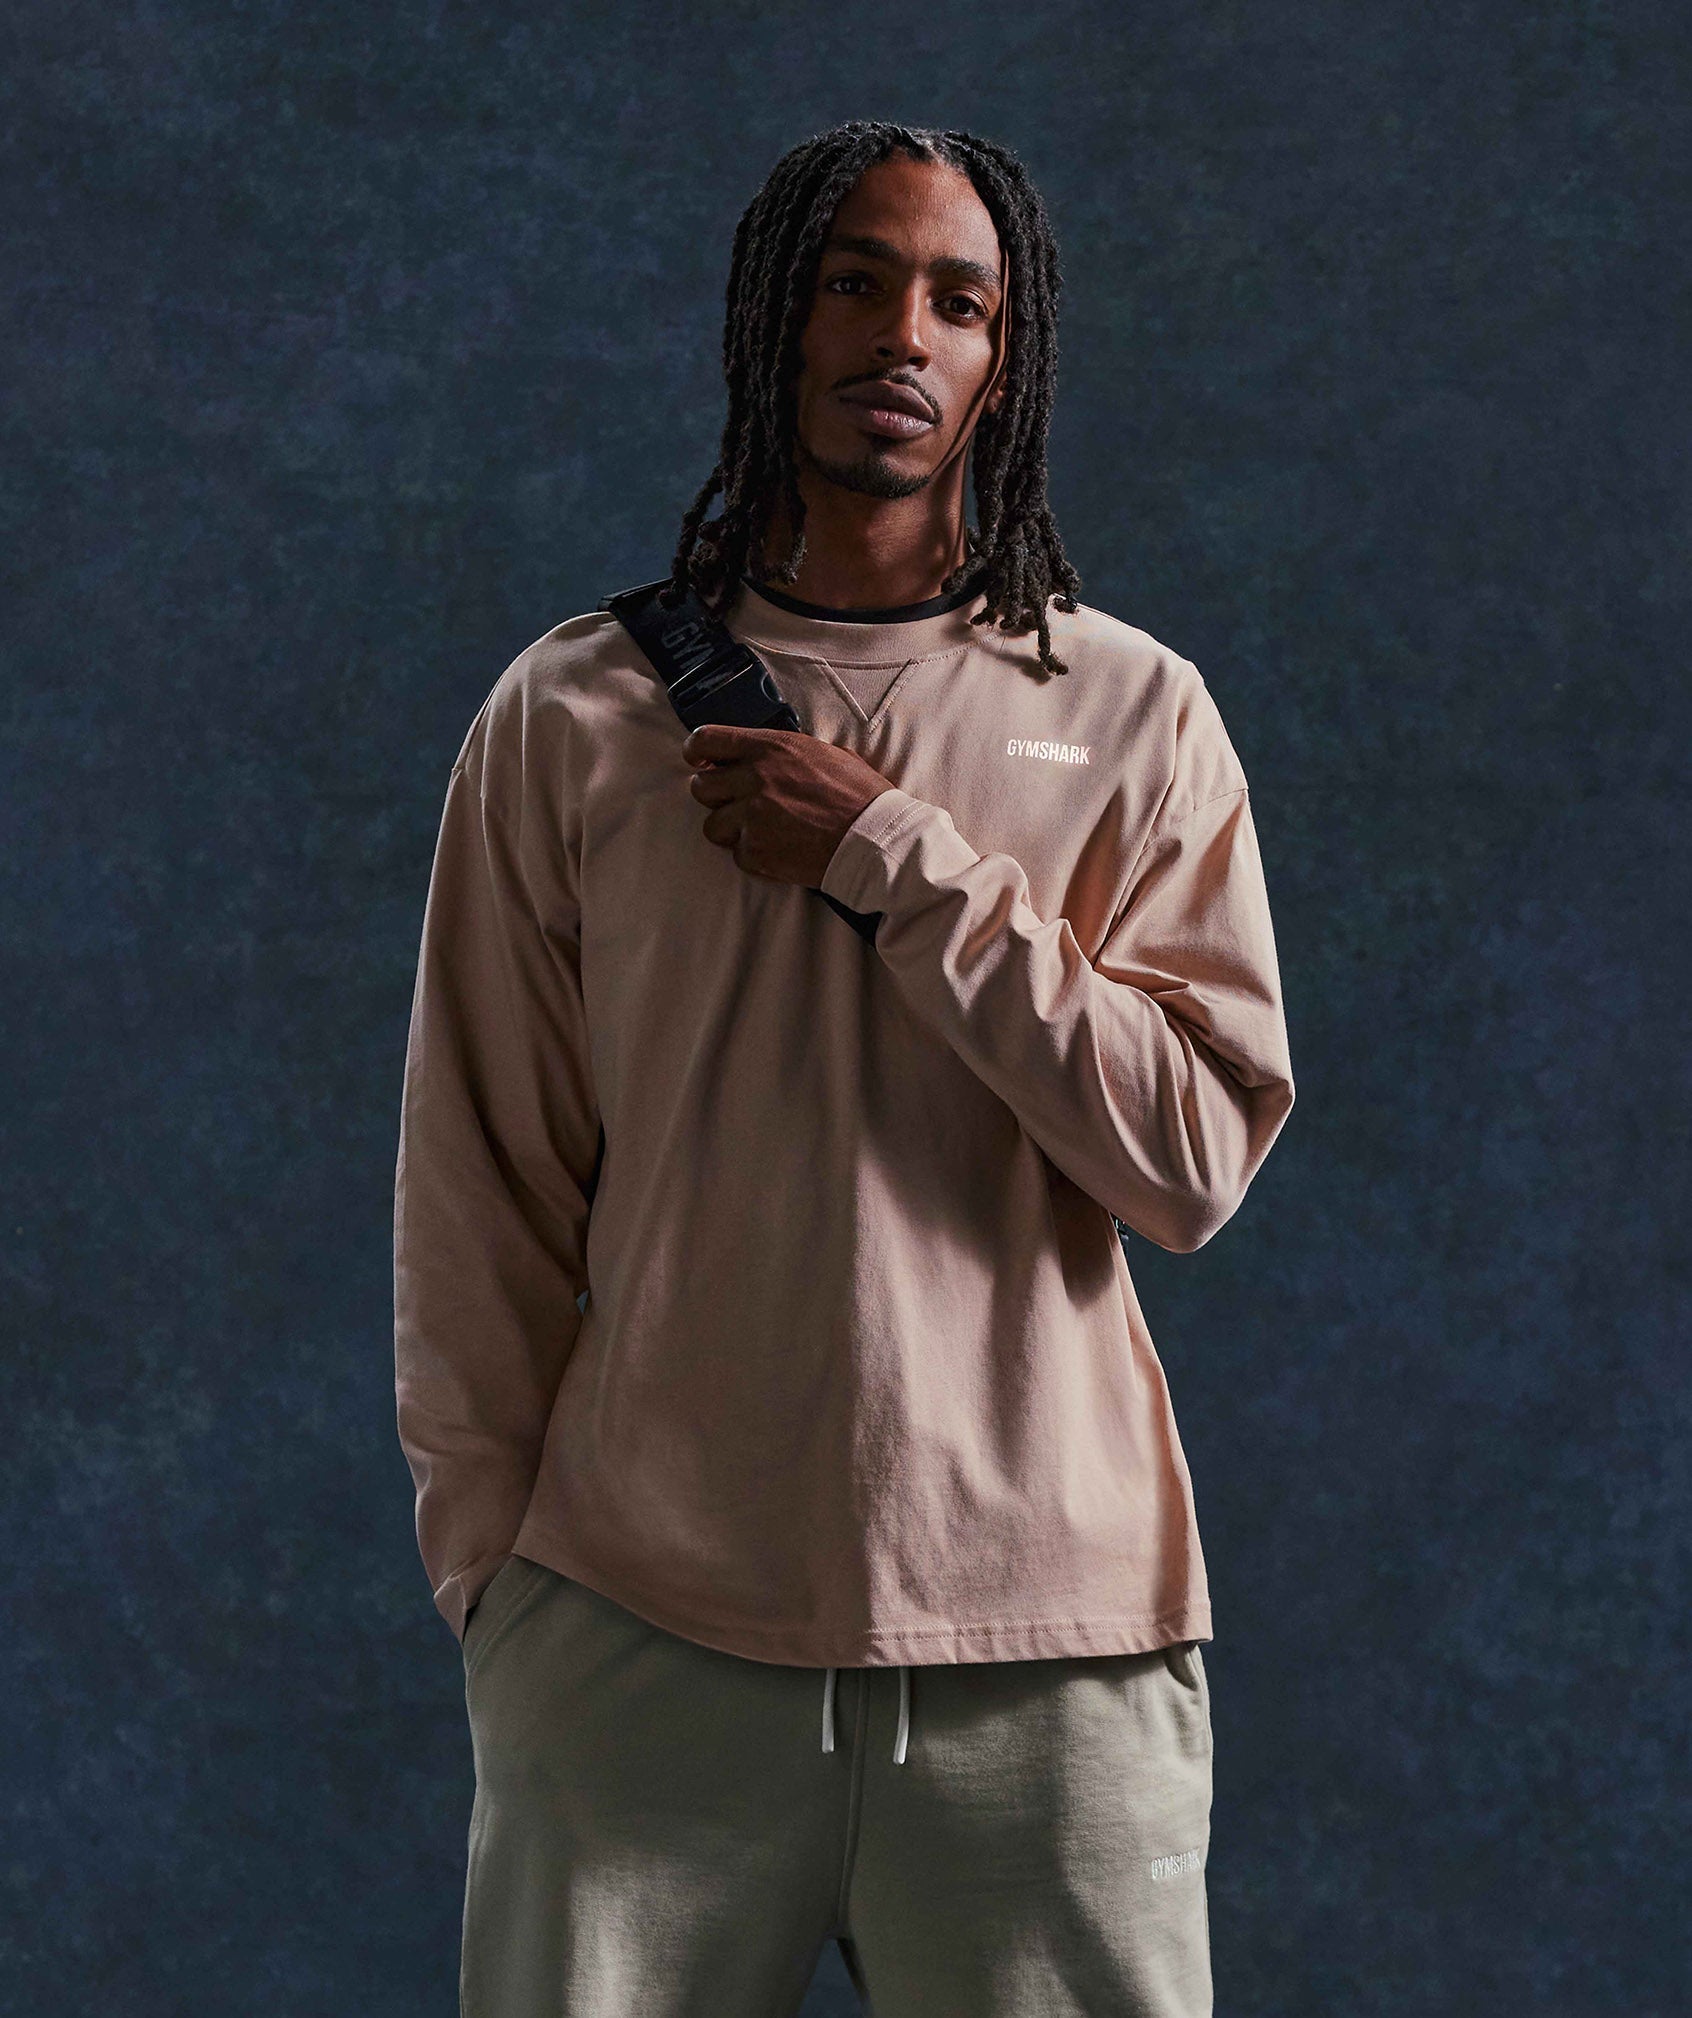 Rest Day Sweats Long Sleeve T-Shirt in Dusty Taupe - view 1